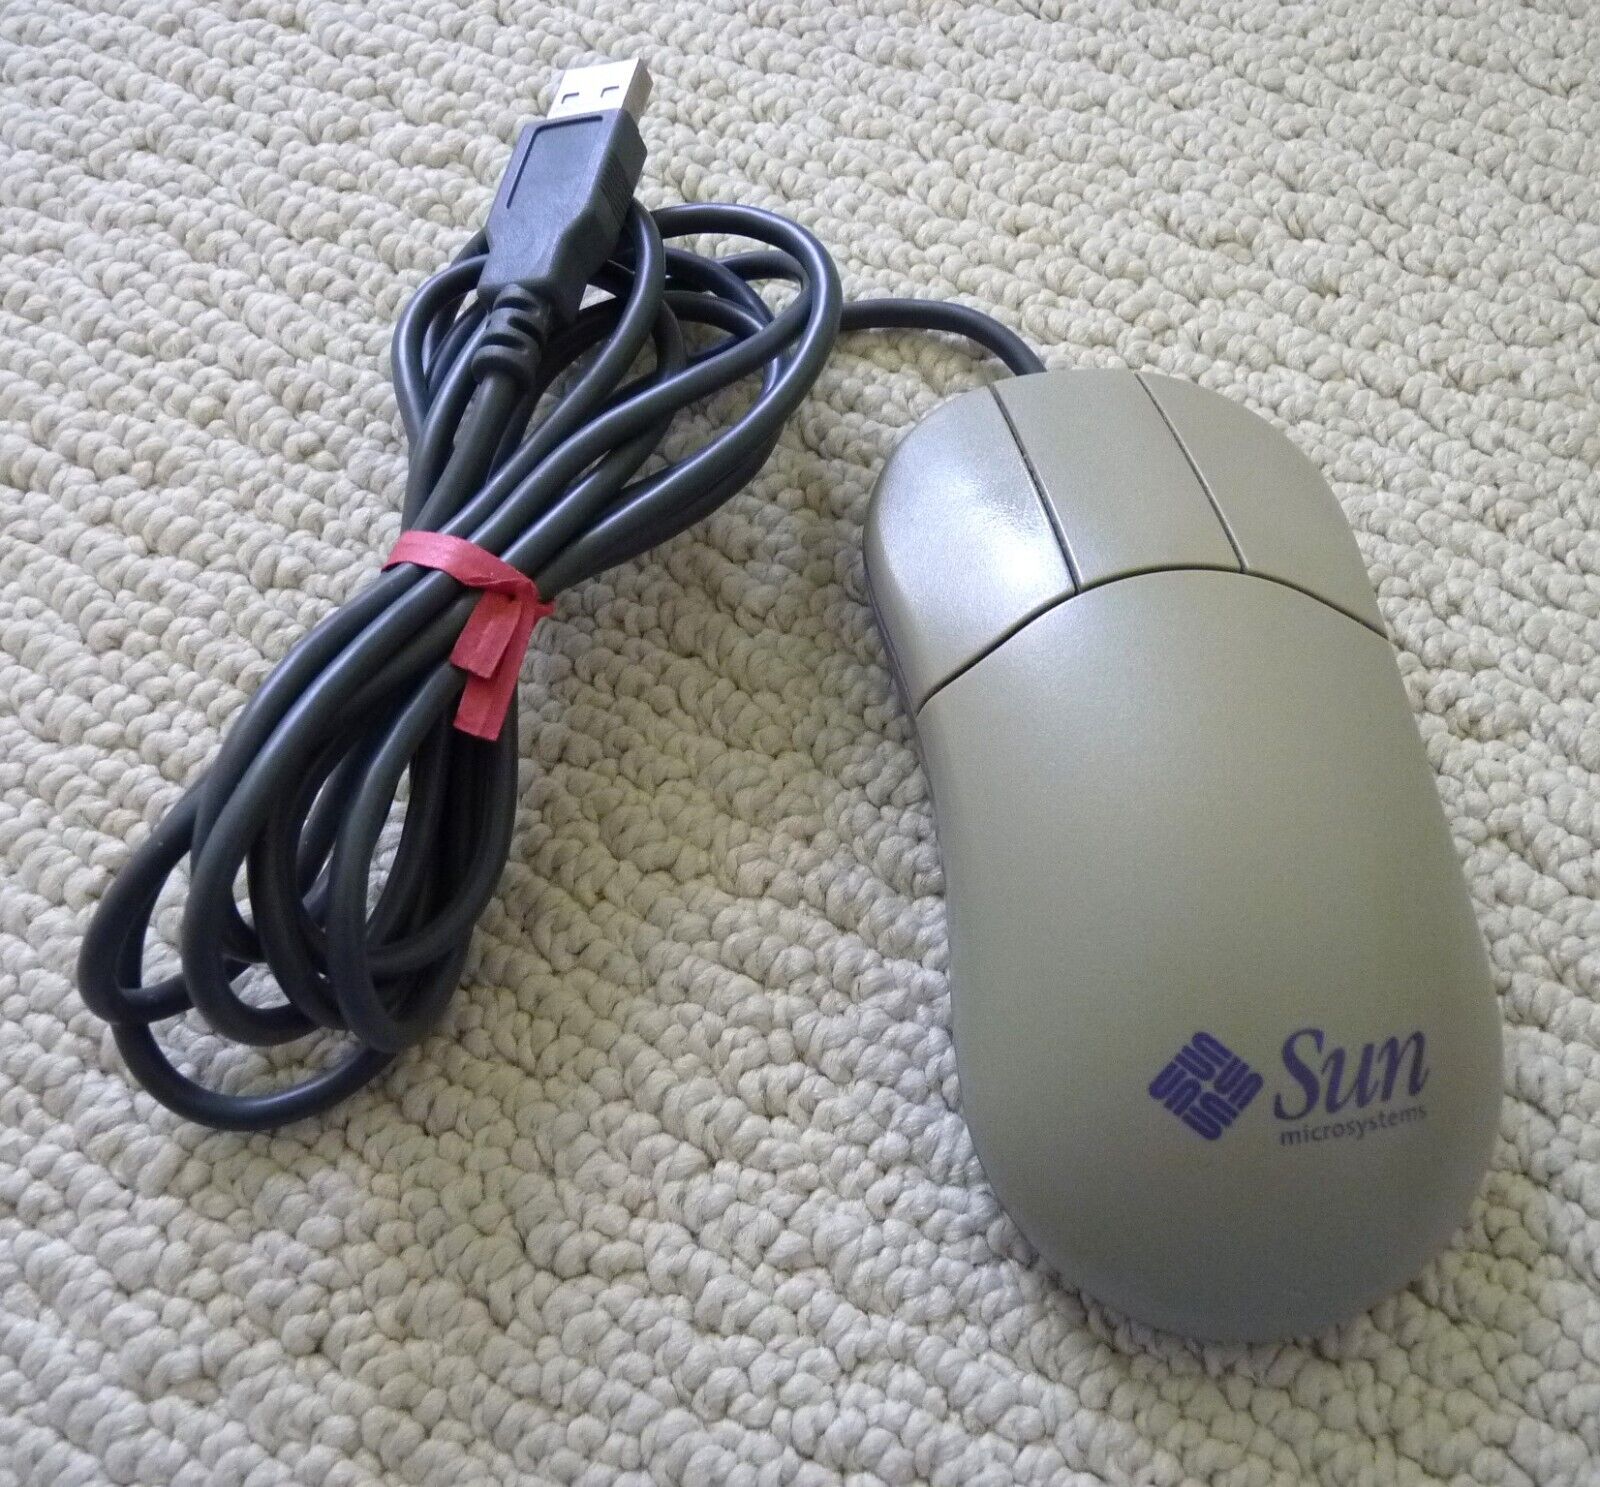 Vintage SUN Microsystems 370-3632 USB CROSSBOW 3 BUTTON USB MOUSE Tested/working